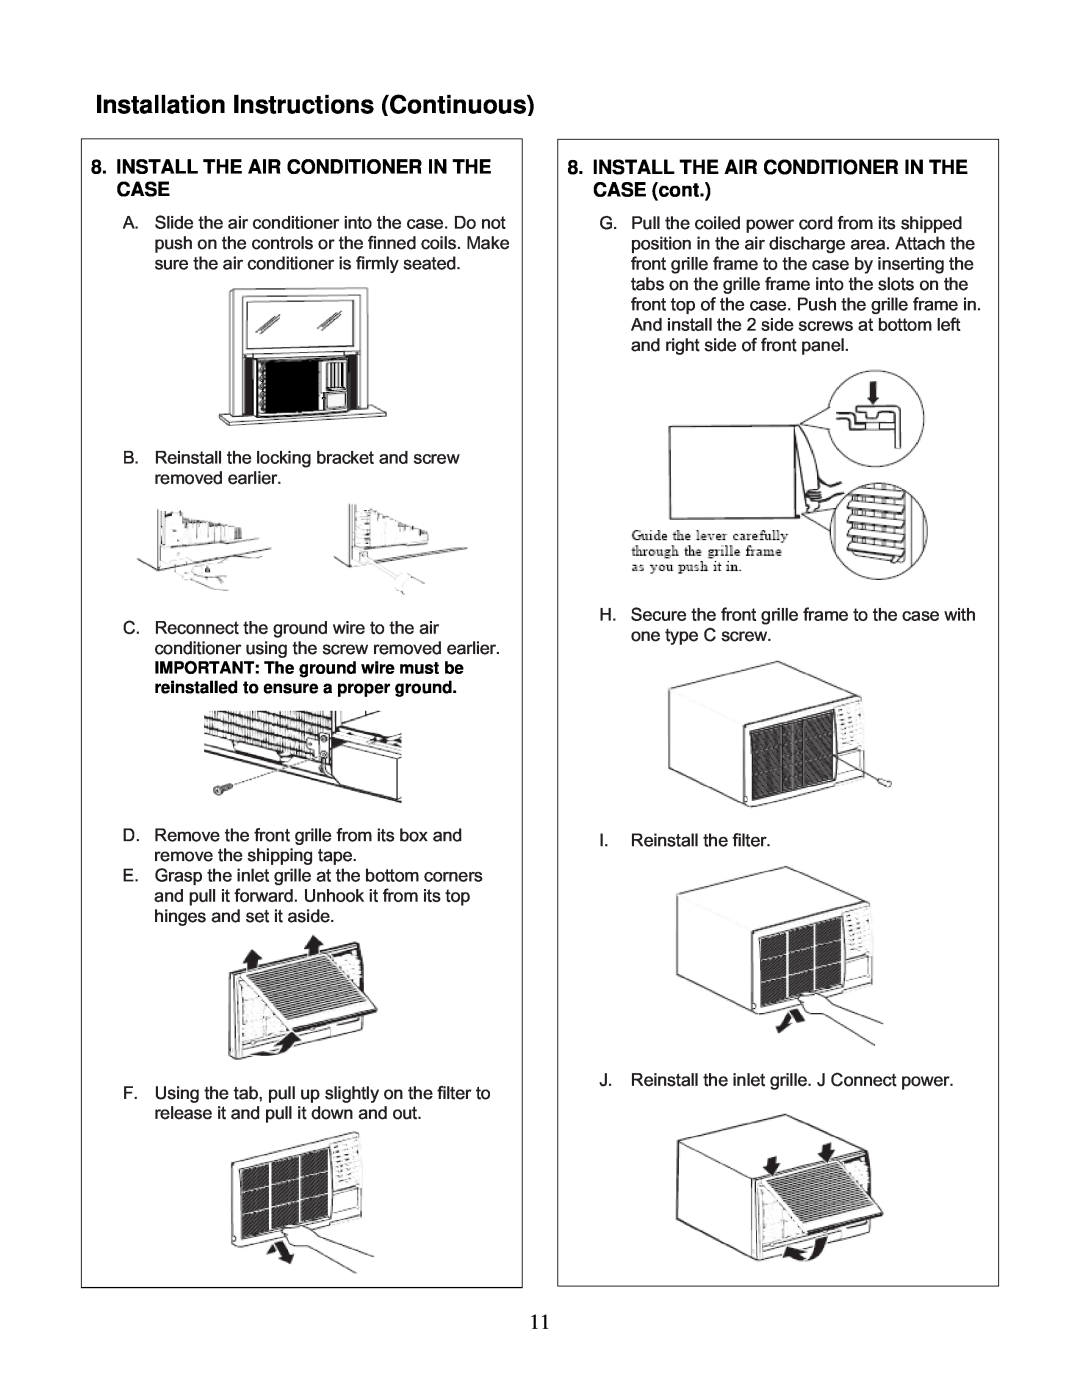 Soleus Air KC-45H installation manual Installation Instructions Continuous, Install The Air Conditioner In The Case 